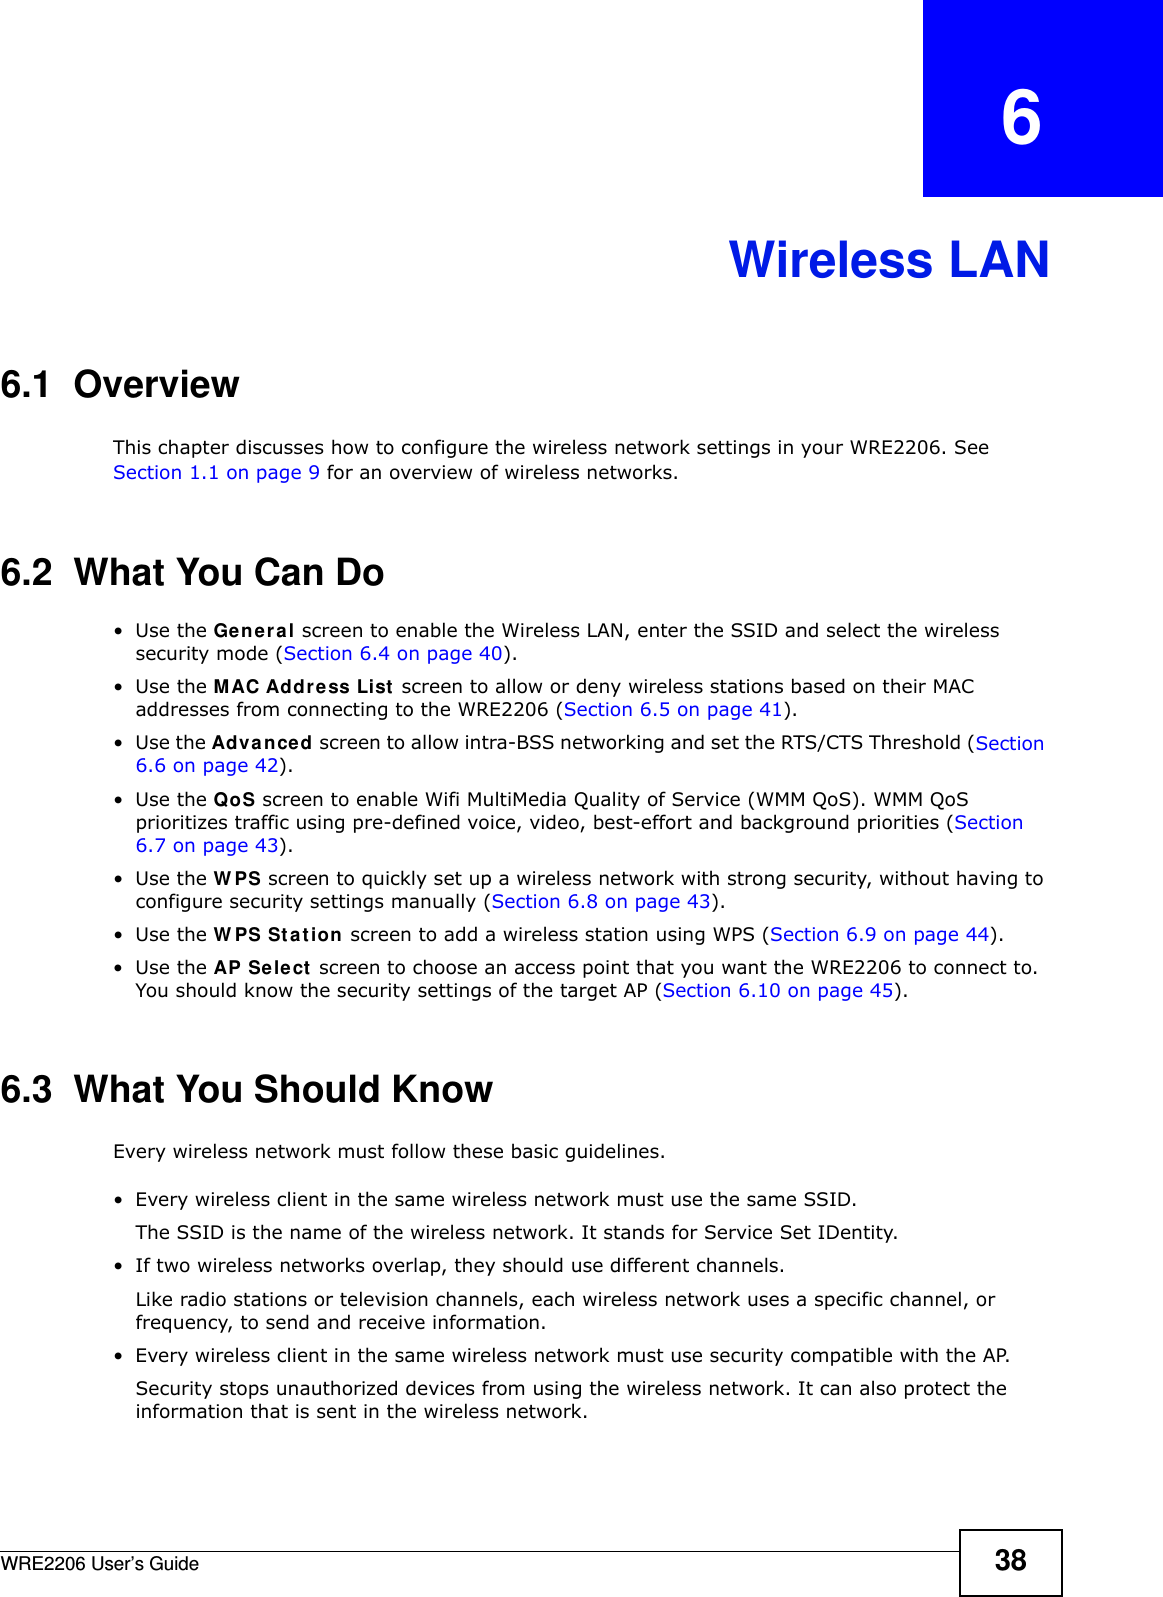 WRE2206 User’s Guide 38CHAPTER   6Wireless LAN6.1  OverviewThis chapter discusses how to configure the wireless network settings in your WRE2206. See Section 1.1 on page 9 for an overview of wireless networks.6.2  What You Can Do•Use the Ge ner a l screen to enable the Wireless LAN, enter the SSID and select the wireless security mode (Section 6.4 on page 40).•Use the MAC Address List screen to allow or deny wireless stations based on their MAC addresses from connecting to the WRE2206 (Section 6.5 on page 41).•Use the Adva nced screen to allow intra-BSS networking and set the RTS/CTS Threshold (Section 6.6 on page 42).•Use the QoS screen to enable Wifi MultiMedia Quality of Service (WMM QoS). WMM QoS prioritizes traffic using pre-defined voice, video, best-effort and background priorities (Section 6.7 on page 43).•Use the W PS screen to quickly set up a wireless network with strong security, without having to configure security settings manually (Section 6.8 on page 43).•Use the W PS St a t ion screen to add a wireless station using WPS (Section 6.9 on page 44). •Use the AP Select screen to choose an access point that you want the WRE2206 to connect to. You should know the security settings of the target AP (Section 6.10 on page 45).6.3  What You Should KnowEvery wireless network must follow these basic guidelines.• Every wireless client in the same wireless network must use the same SSID.The SSID is the name of the wireless network. It stands for Service Set IDentity.• If two wireless networks overlap, they should use different channels.Like radio stations or television channels, each wireless network uses a specific channel, or frequency, to send and receive information.• Every wireless client in the same wireless network must use security compatible with the AP.Security stops unauthorized devices from using the wireless network. It can also protect the information that is sent in the wireless network.